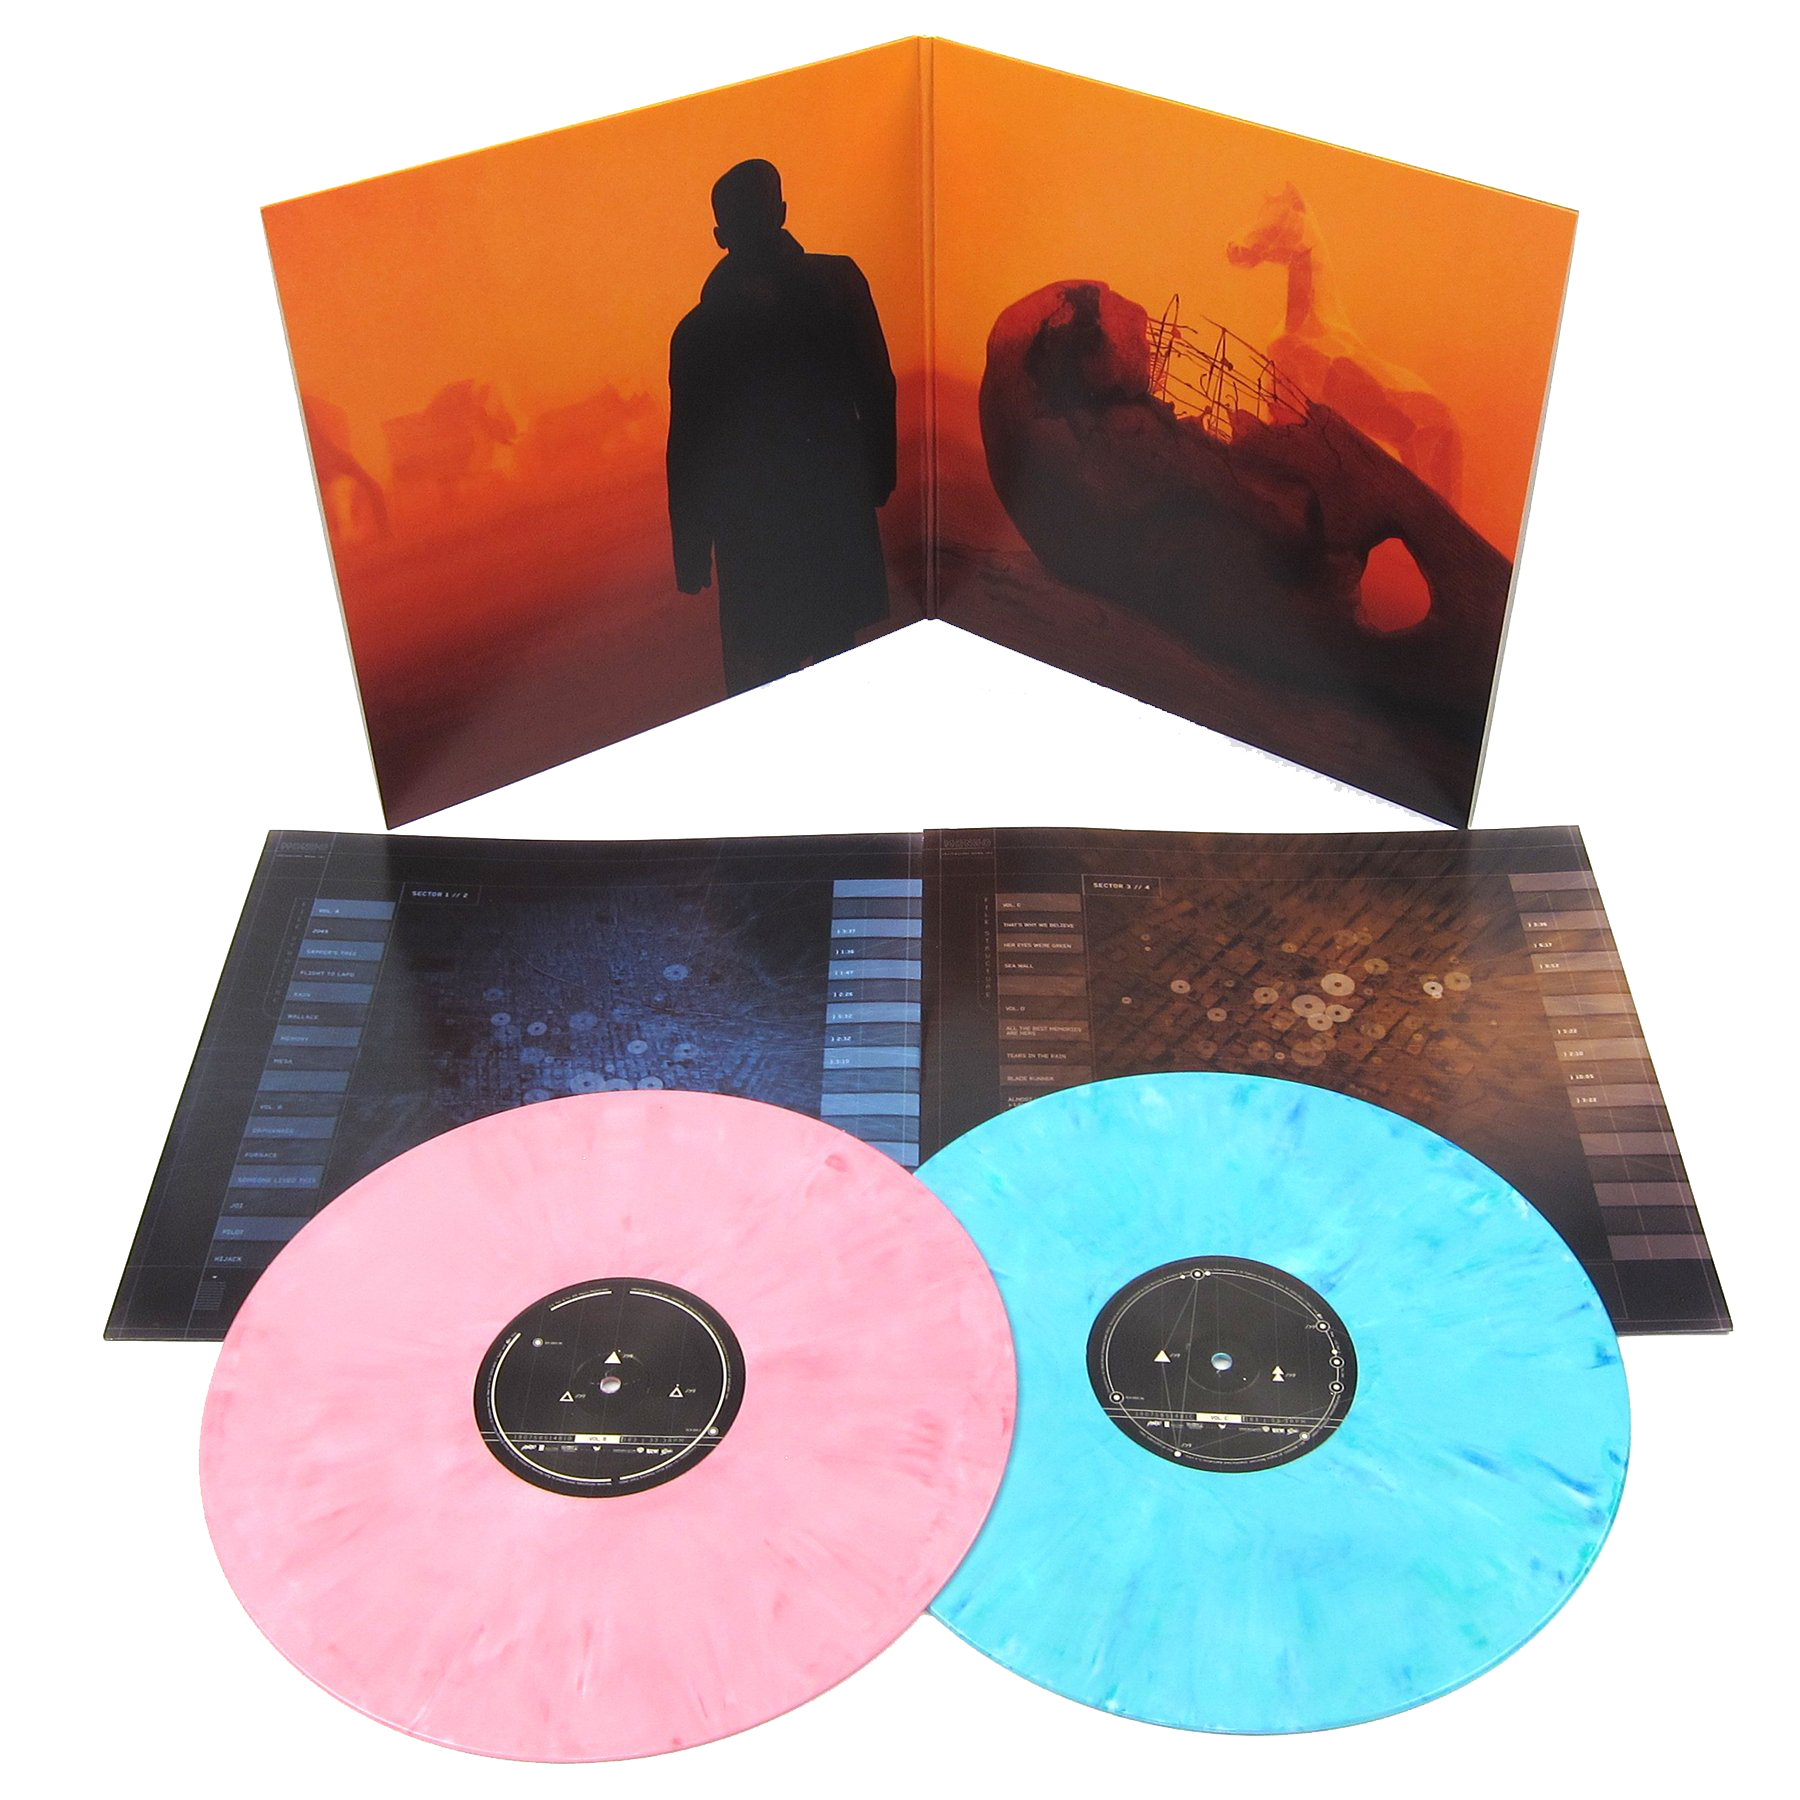 Runner 2049 (Limited Edition Mondo Exclusive 2XLP Pink & Teal Vi – Acetate